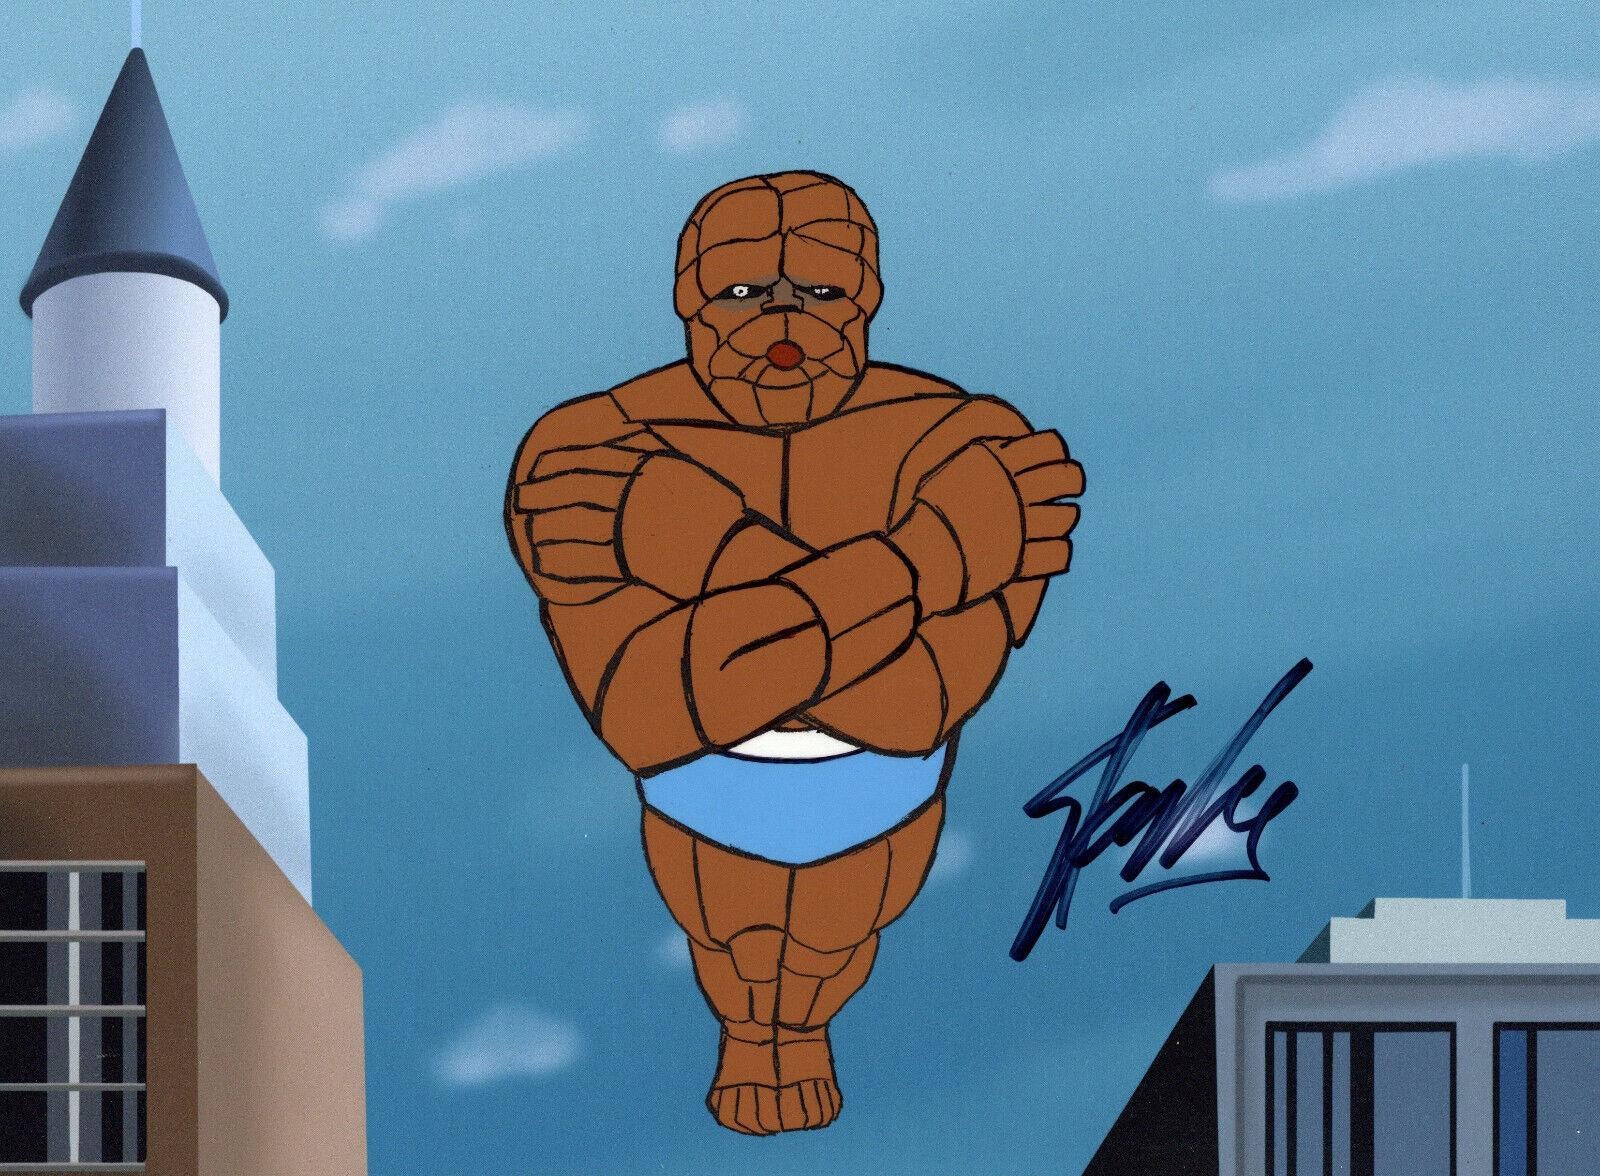 Up for sale from the series is an original production cel on printed background with matching original production drawing featuring The Thing Series from 1979 created by Hanna Barbera. Both the cel and drawing come hand signed by Stan Lee, un-framed